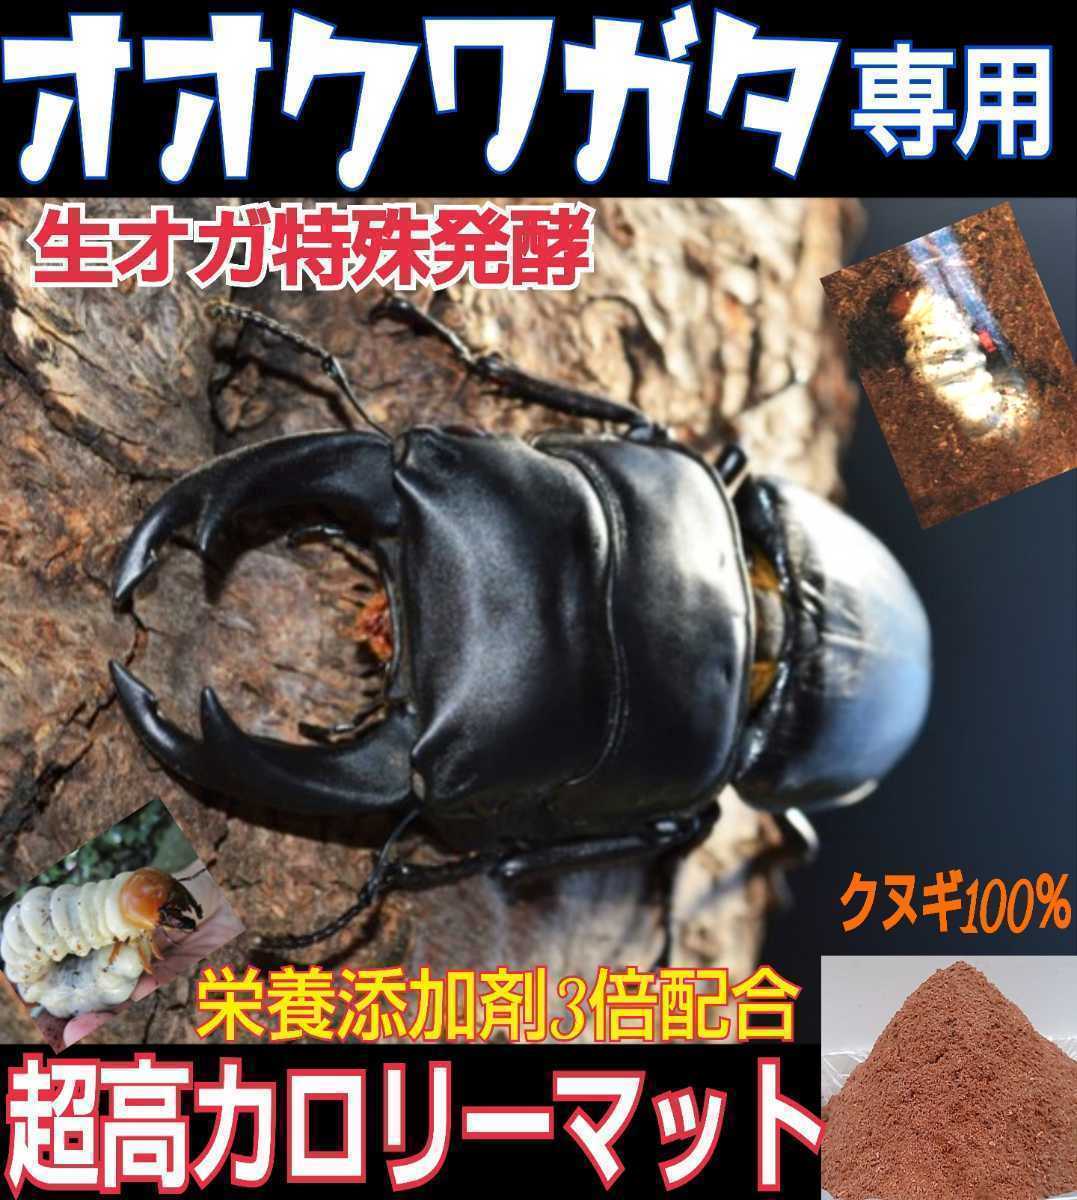  oo stag beetle exclusive use * super height calorie mat * raw oga. special departure .! symbiosis bacteria * special amino acid etc. nutrition addition agent .3 times combination * sawtooth oak, 100% feedstocks!